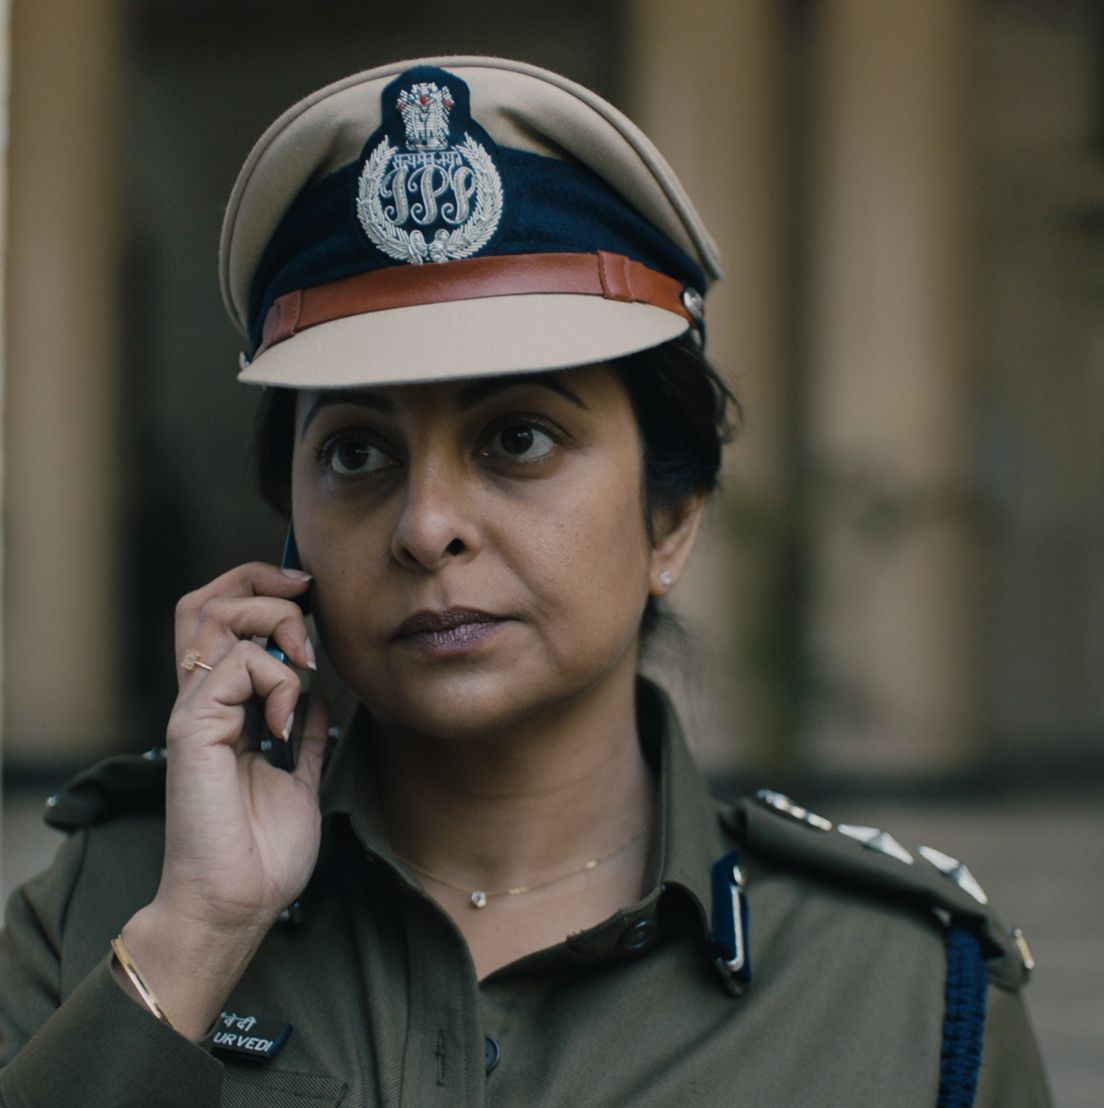 Hd Indian Mommy Rep Fuck - The True Story Behind Netflix's 'Delhi Crime' Is Absolutely Horrific